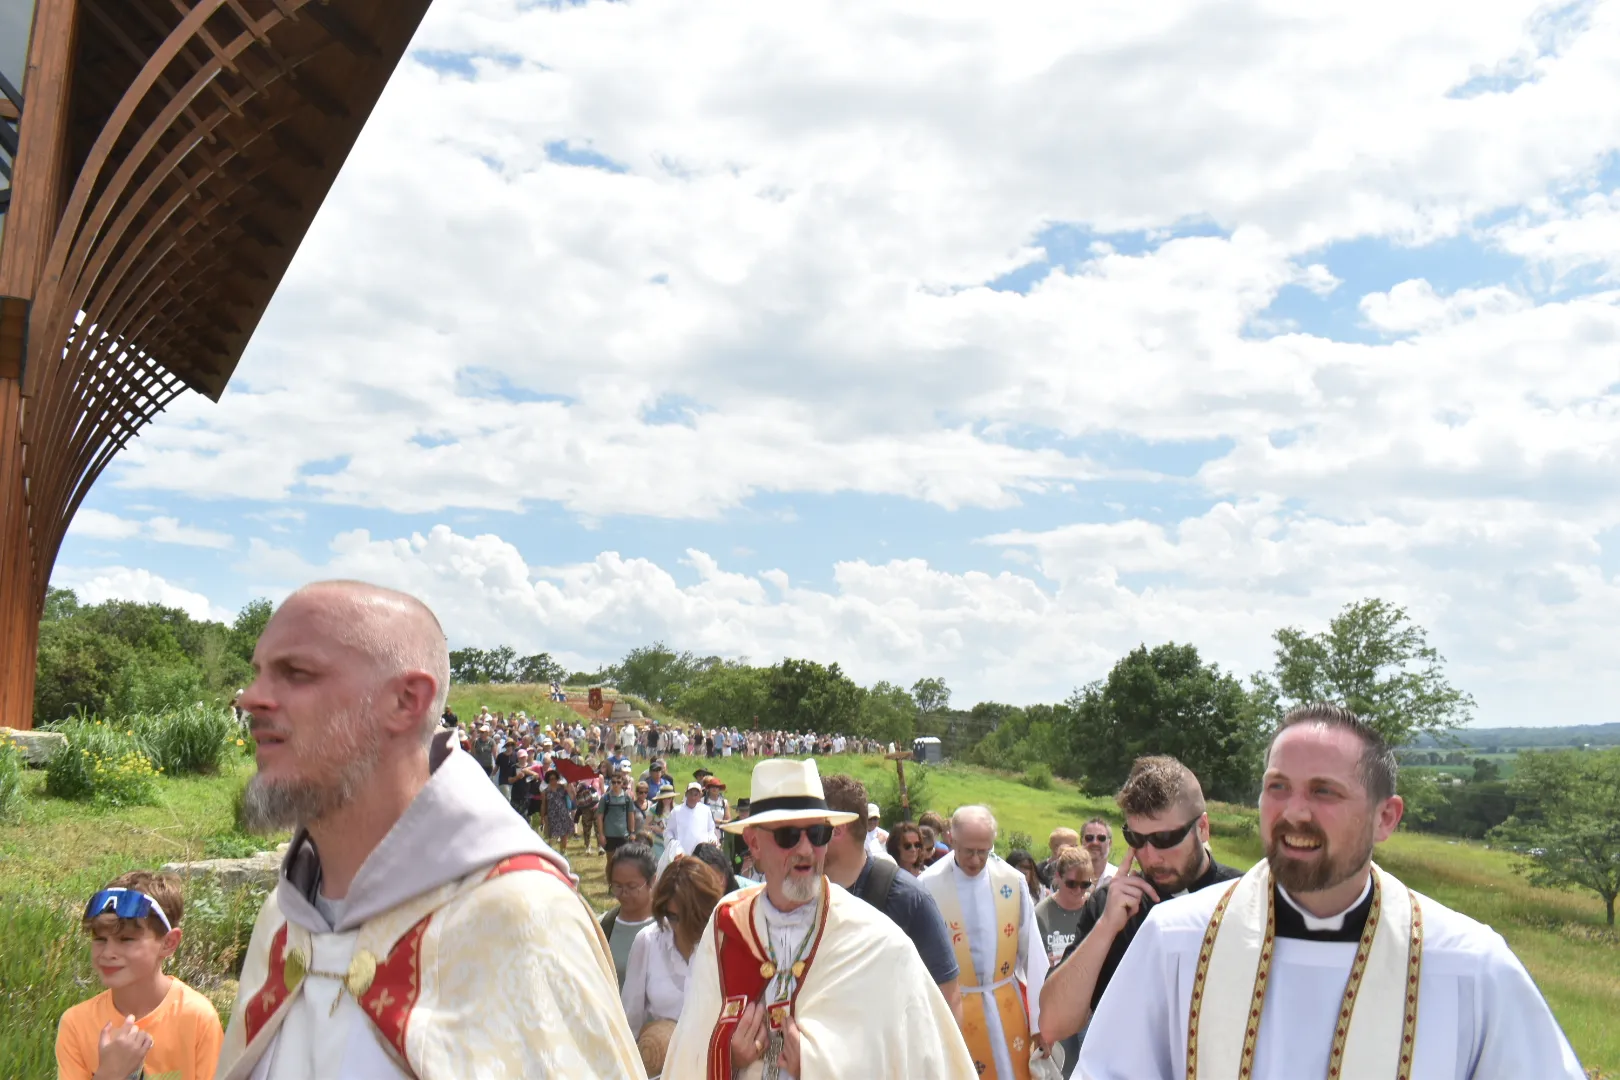 The Eucharistic procession reaches the Holy Family Shrine, led by Bishop James Conley (center), as participants follow along the pathway around the shrine on June 21, 2024. Credit: Kate Quiñones/CNA